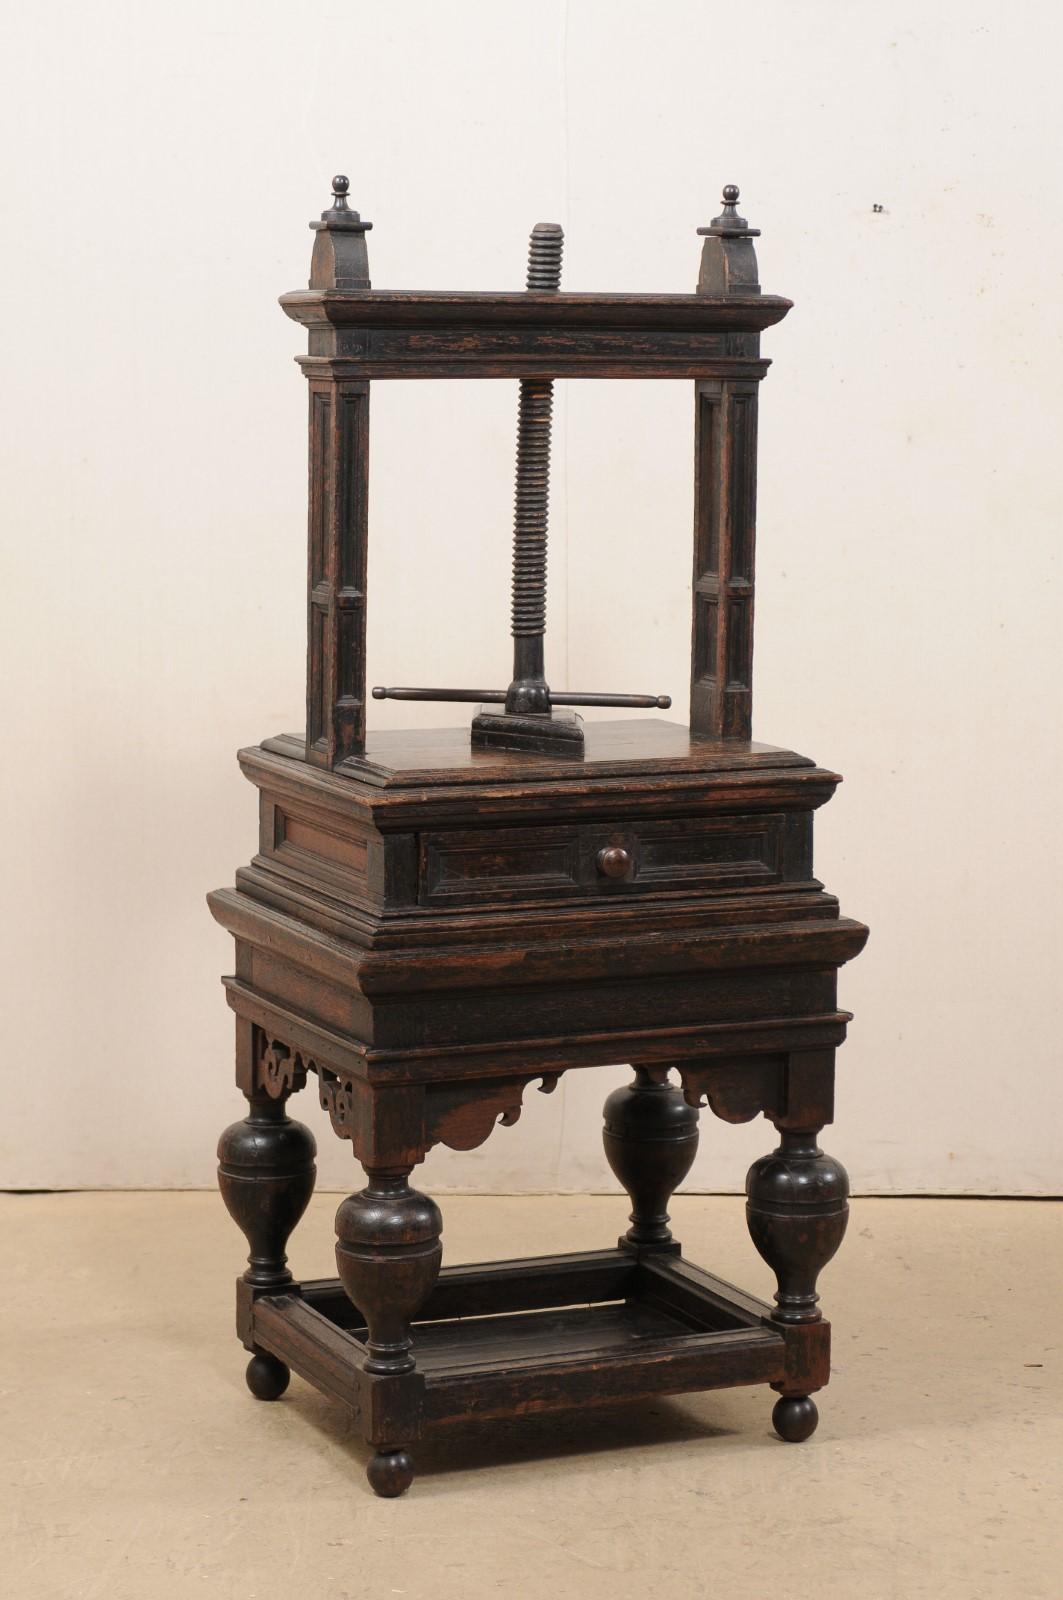 A Flemish freestanding book press from the 18th century, possibly older. This antique book press from Belgium is a fabulous piece of decorative art on its own. Standing approximately 5.5 feet in height, this oak wood piece is comprised of a